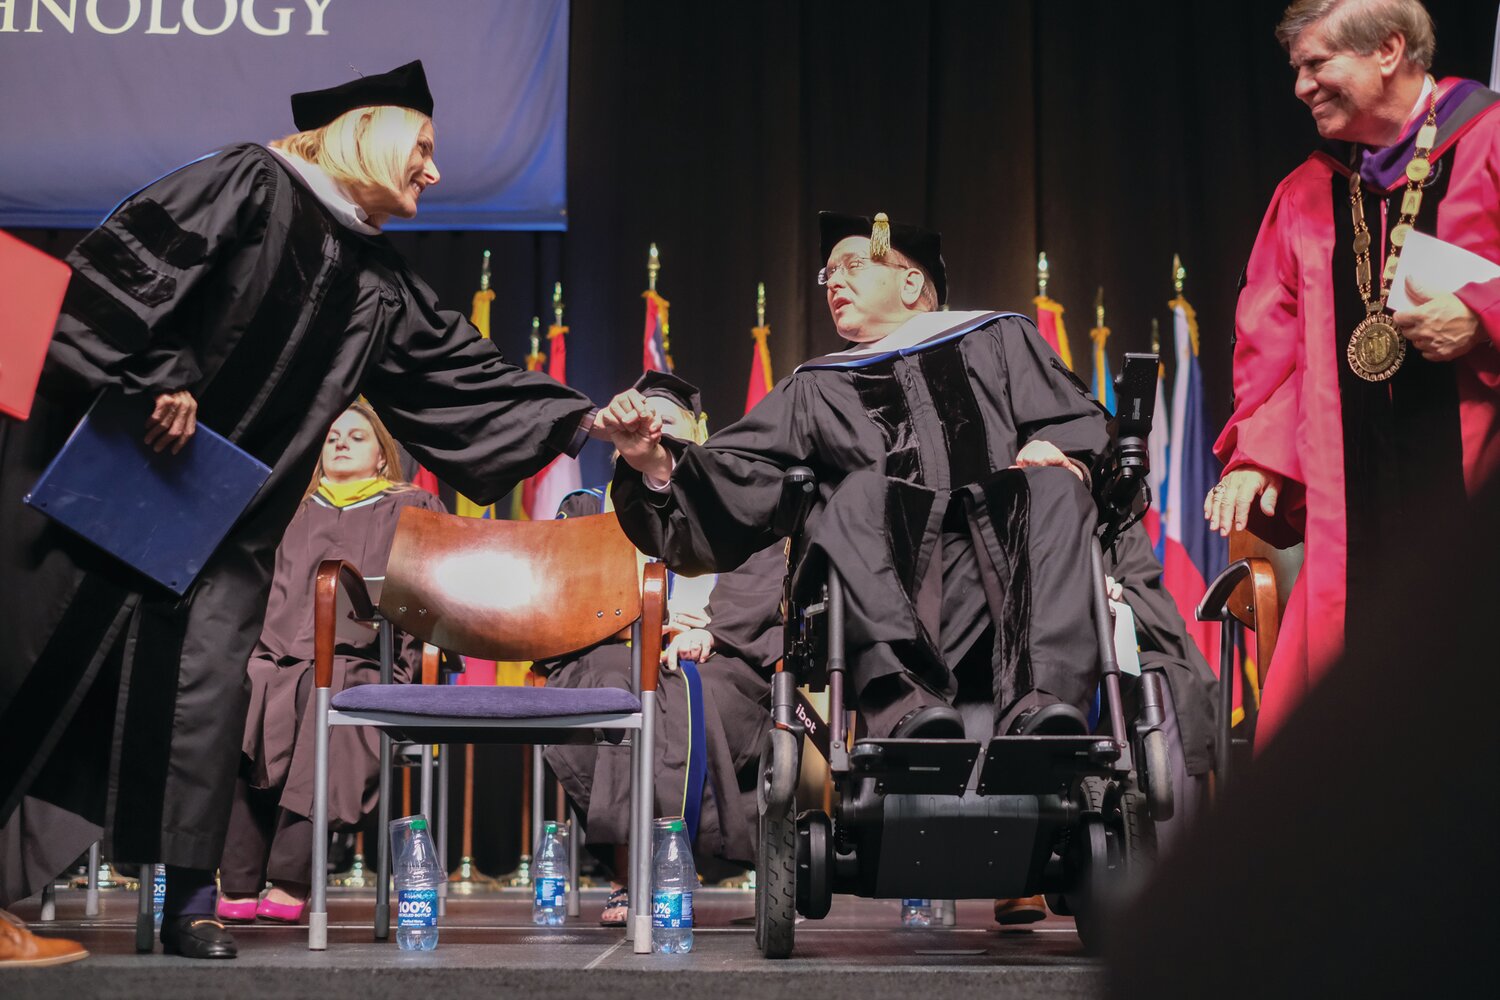 SHARING THE SPOTLIGHT AT GRADUATION: Academy-Award winning actress and activist Marlee Matlin and former Congressman James Langevin were recognized for their achievements with honorary degrees Sunday by New England Institute of Technology.  (Photo courtesy of NEIT)